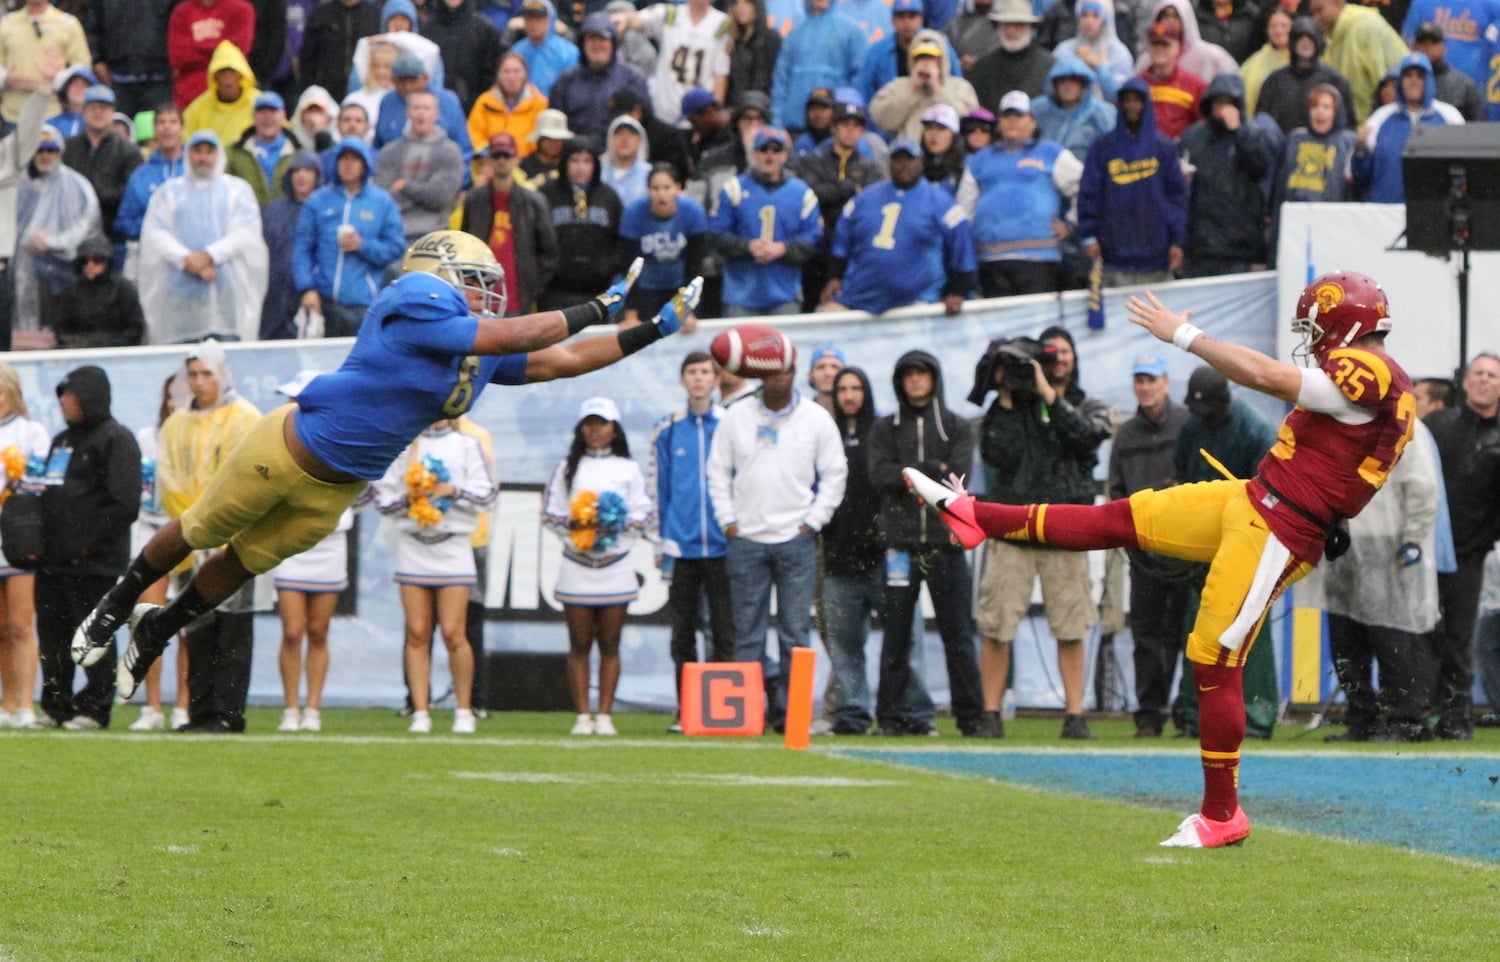 UCLA Vs USC. Photo Credit: Neon Tommy | Under Creative Commons License